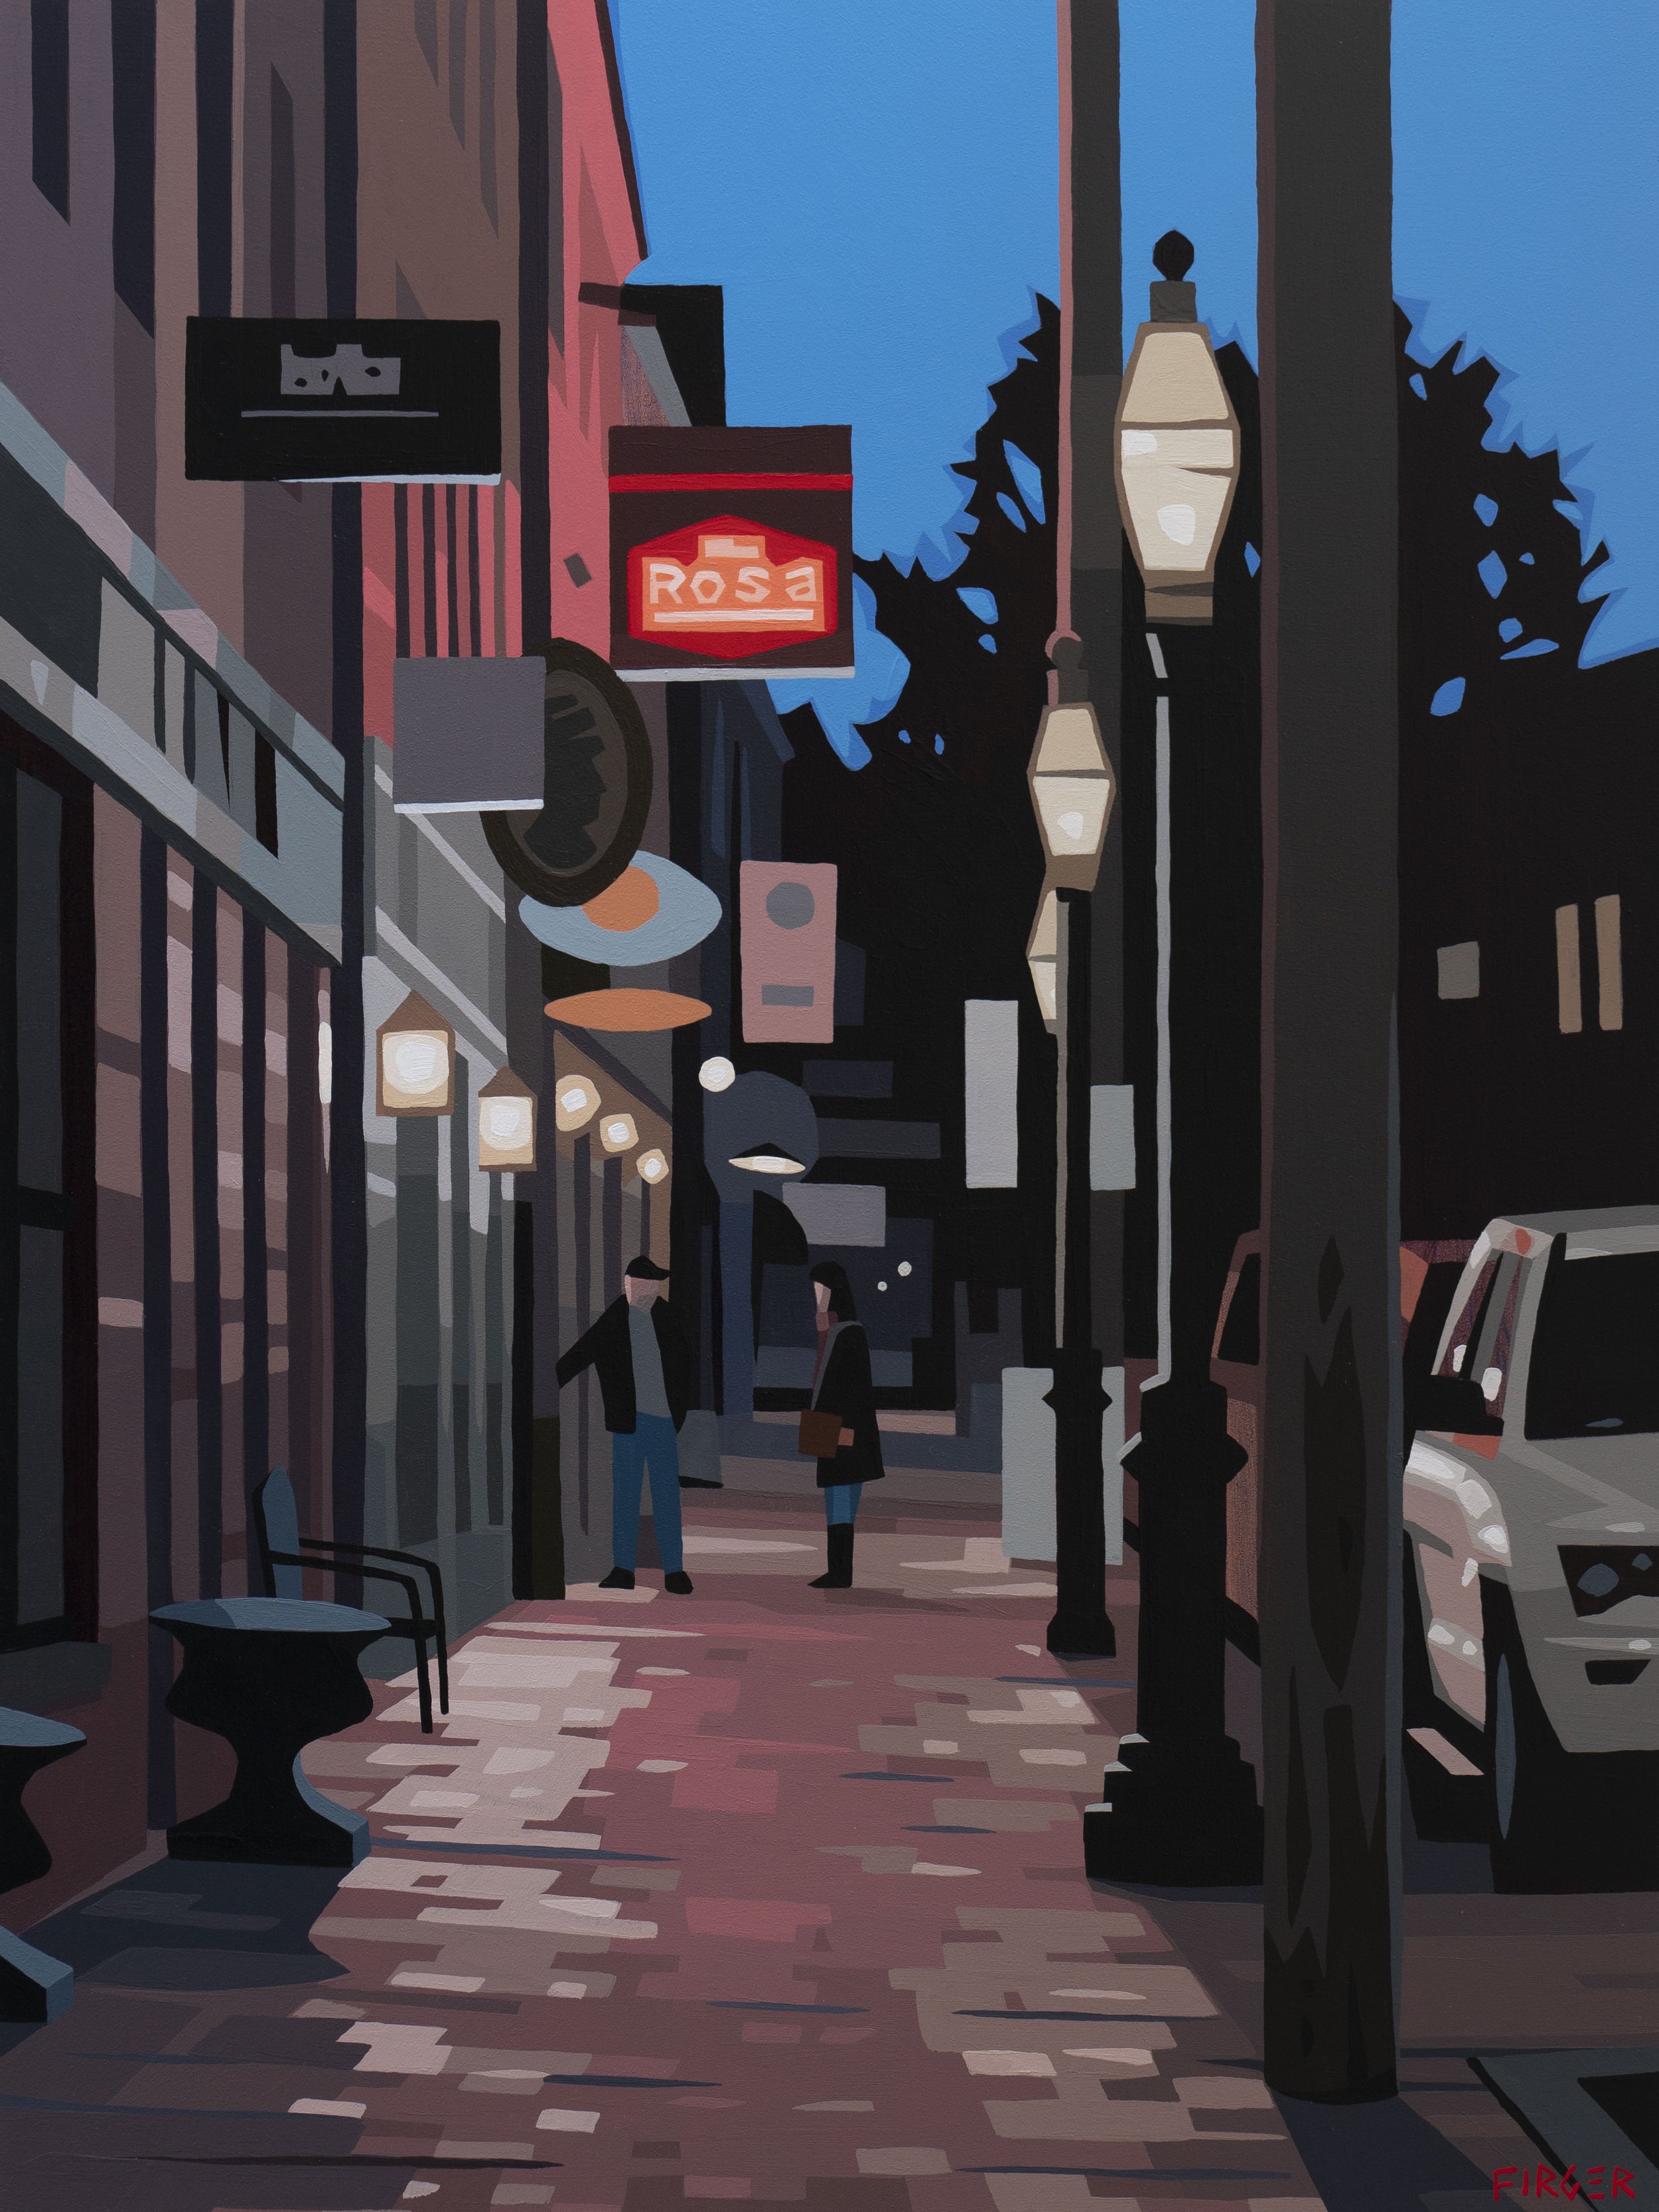 State Street Lights - 12 x 16, Acrylic on Panel (SOLD)